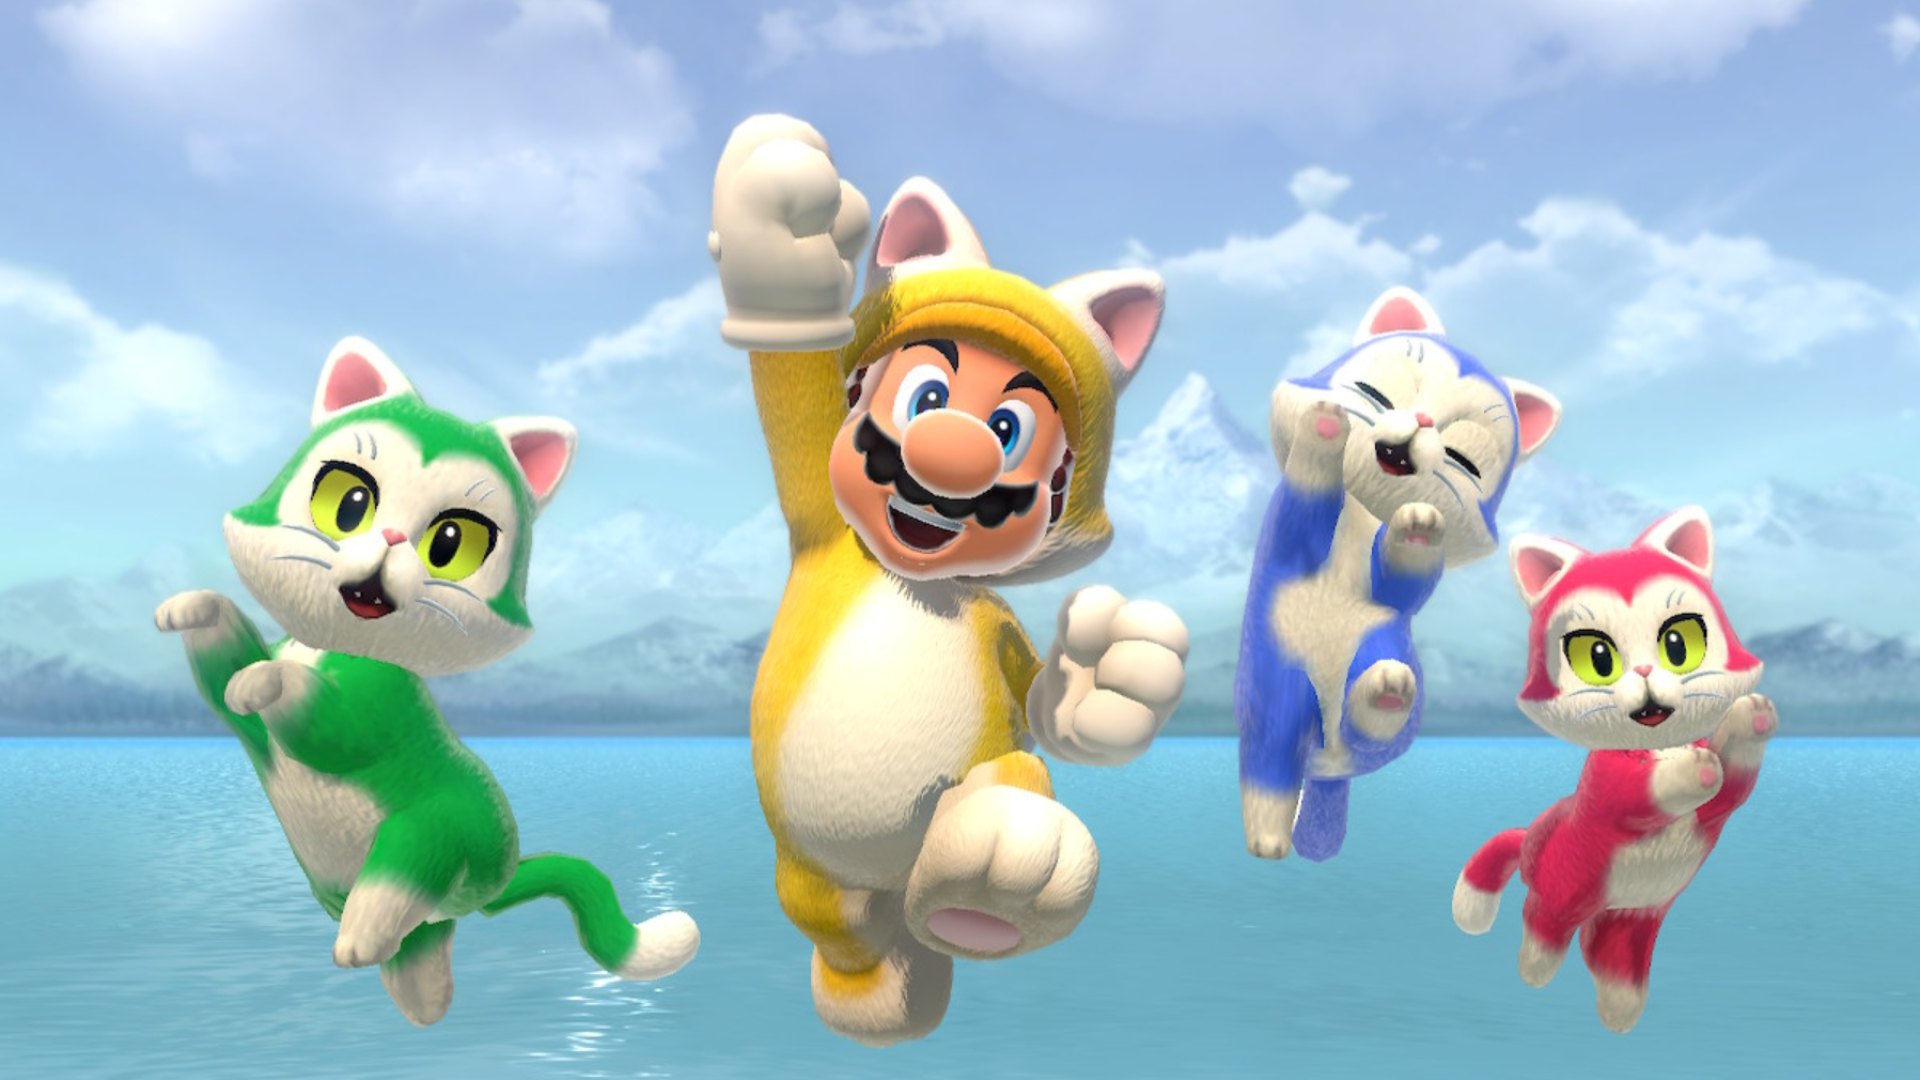 REVIEW: SUPER MARIO 3D WORLD + BOWSER'S FURY () 